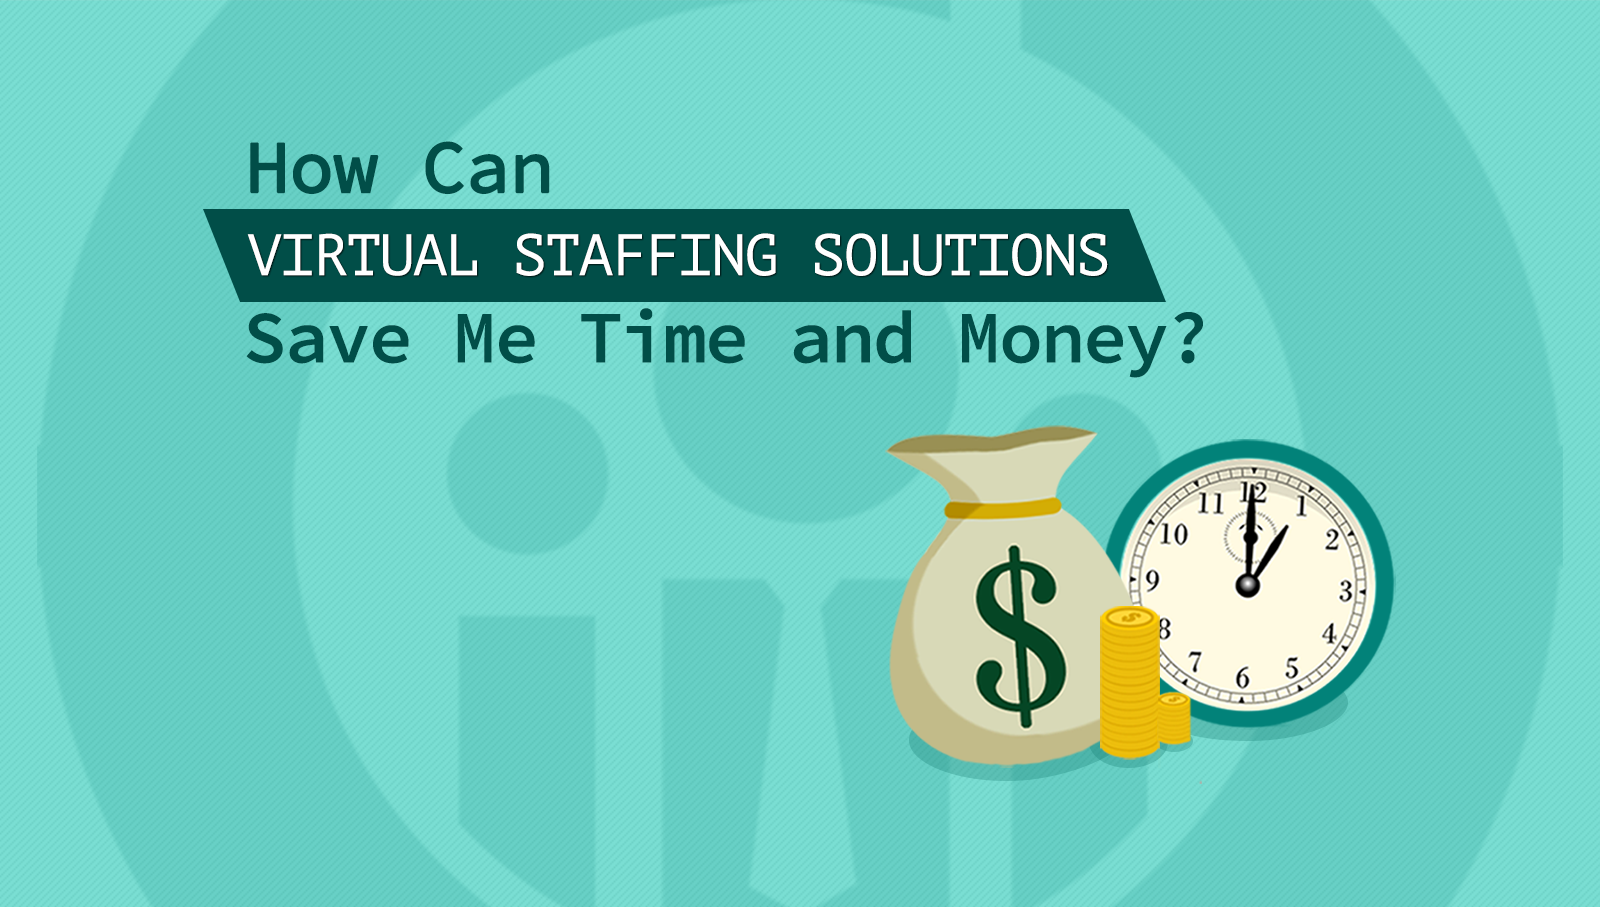 How can virtual staffing solutions save me time and money?